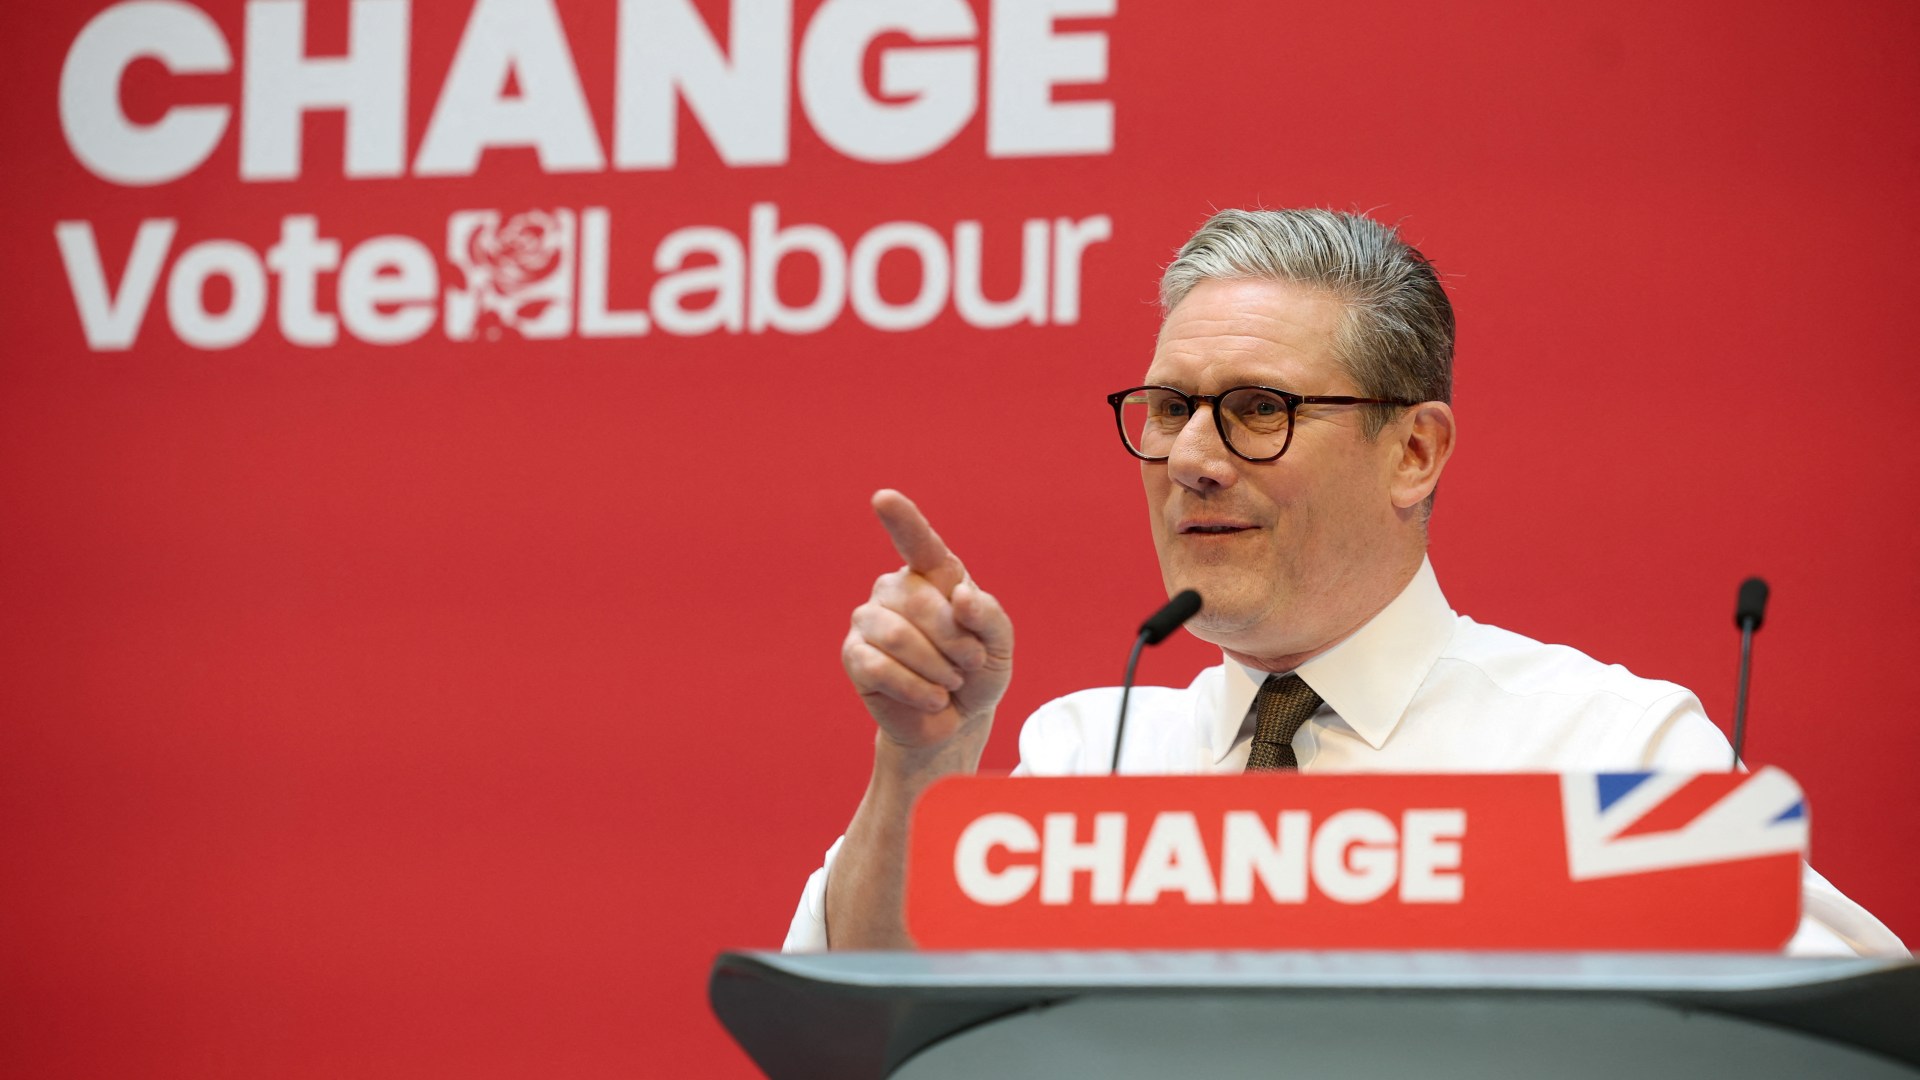 Keir Starmer promises no tax rises for working Brits at Labour’s manifesto launch – how it affects you? [Video]